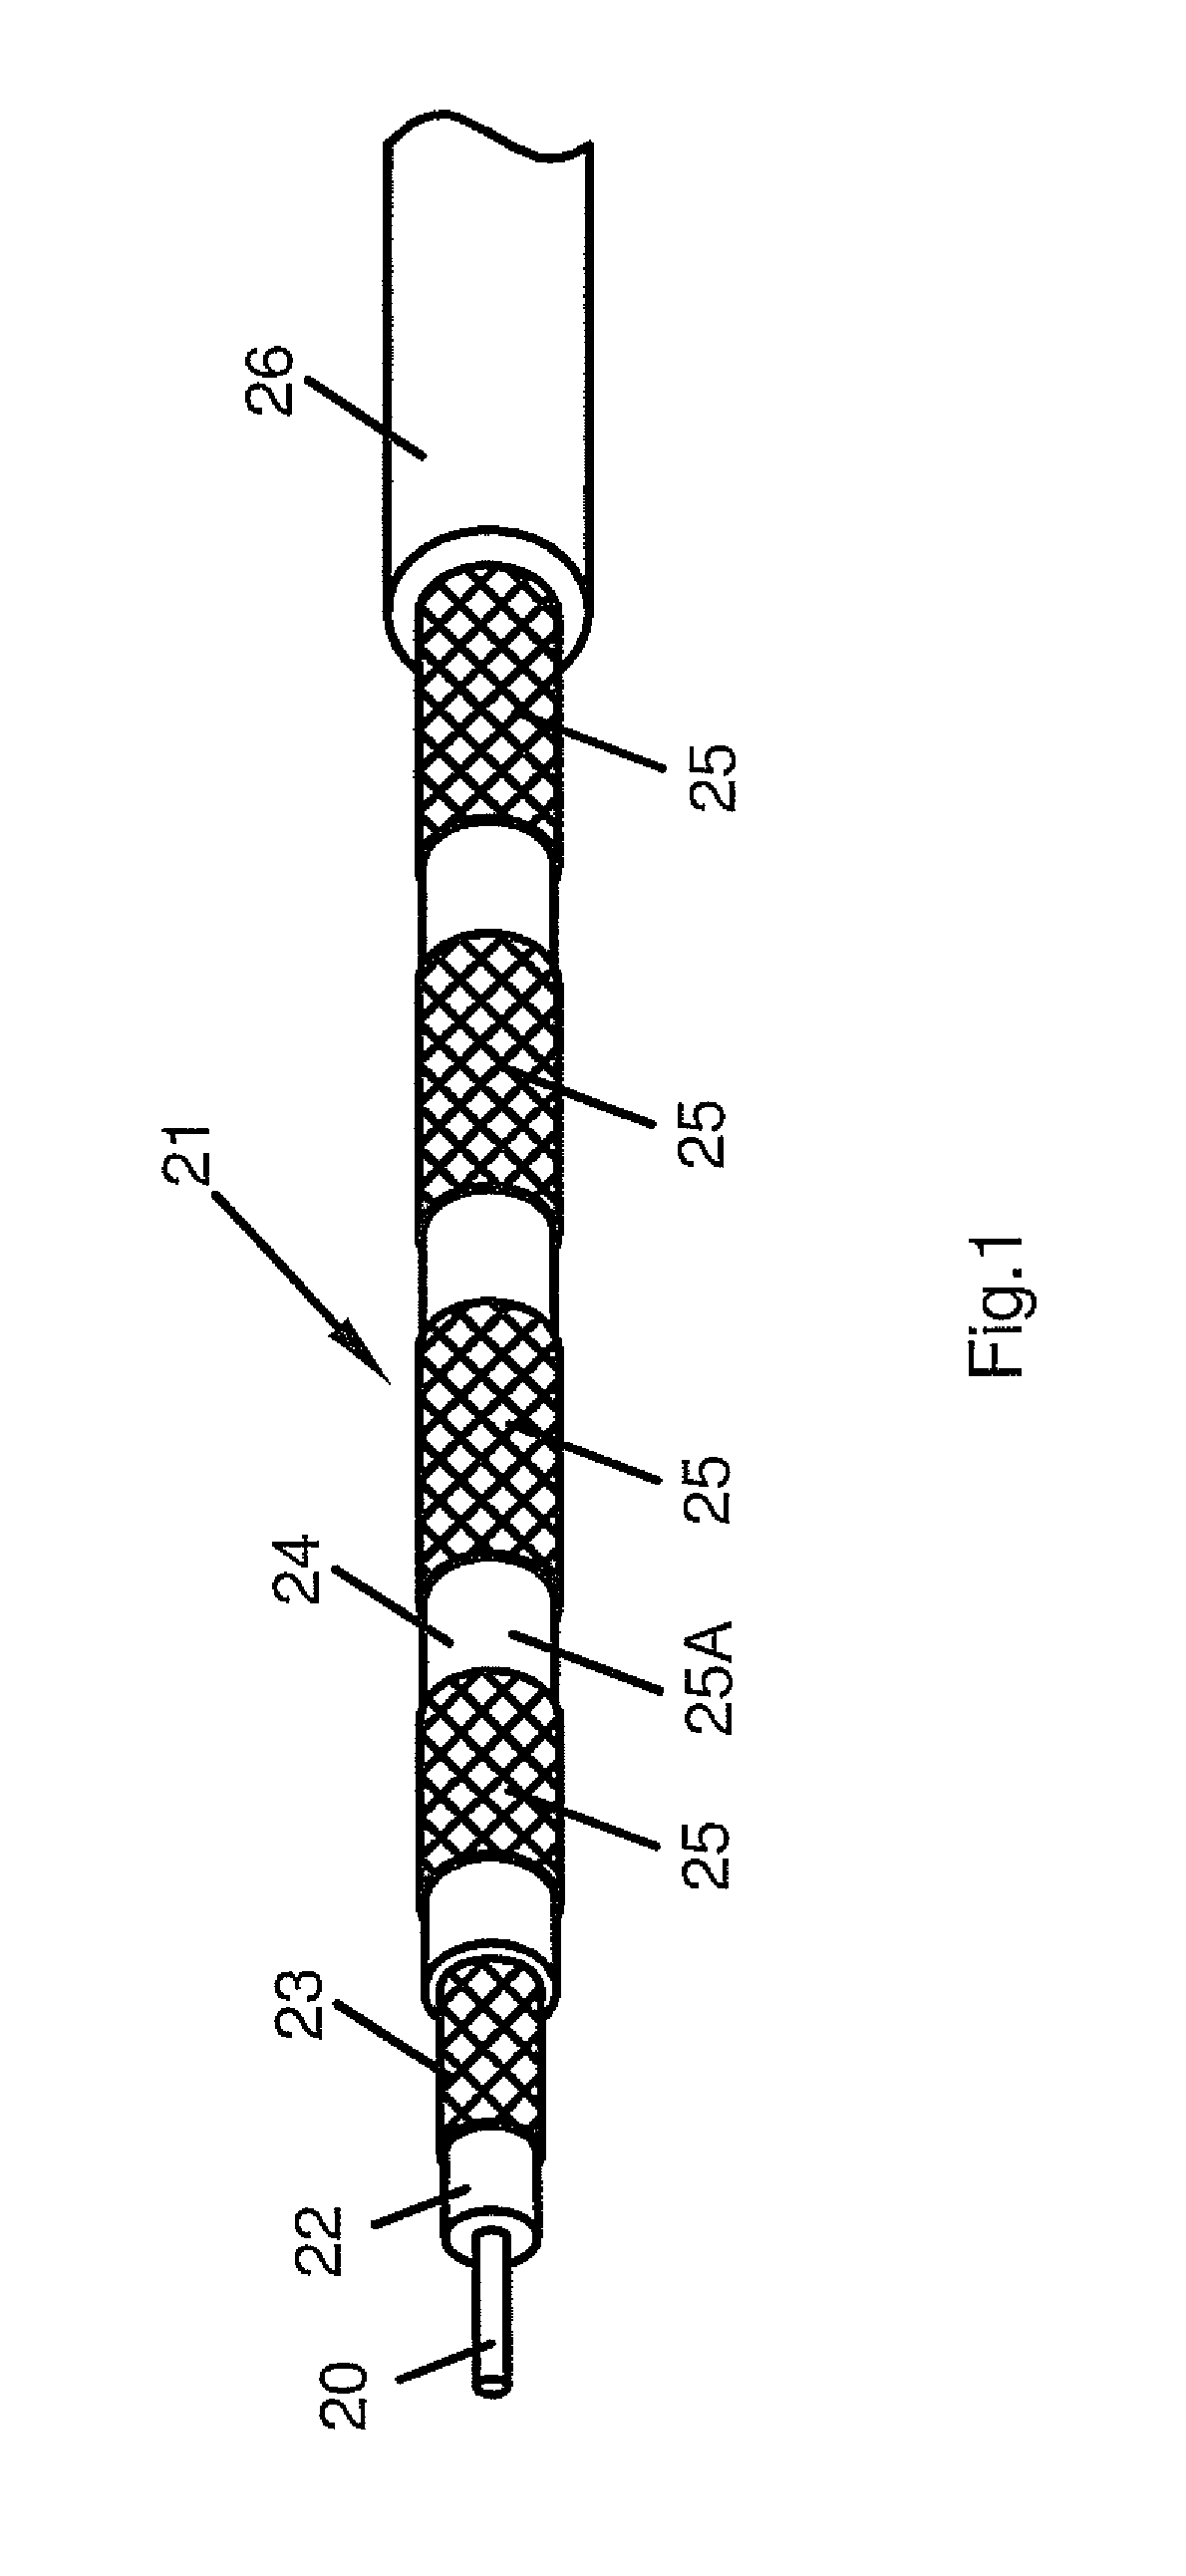 Floating segmented shield cable assembly